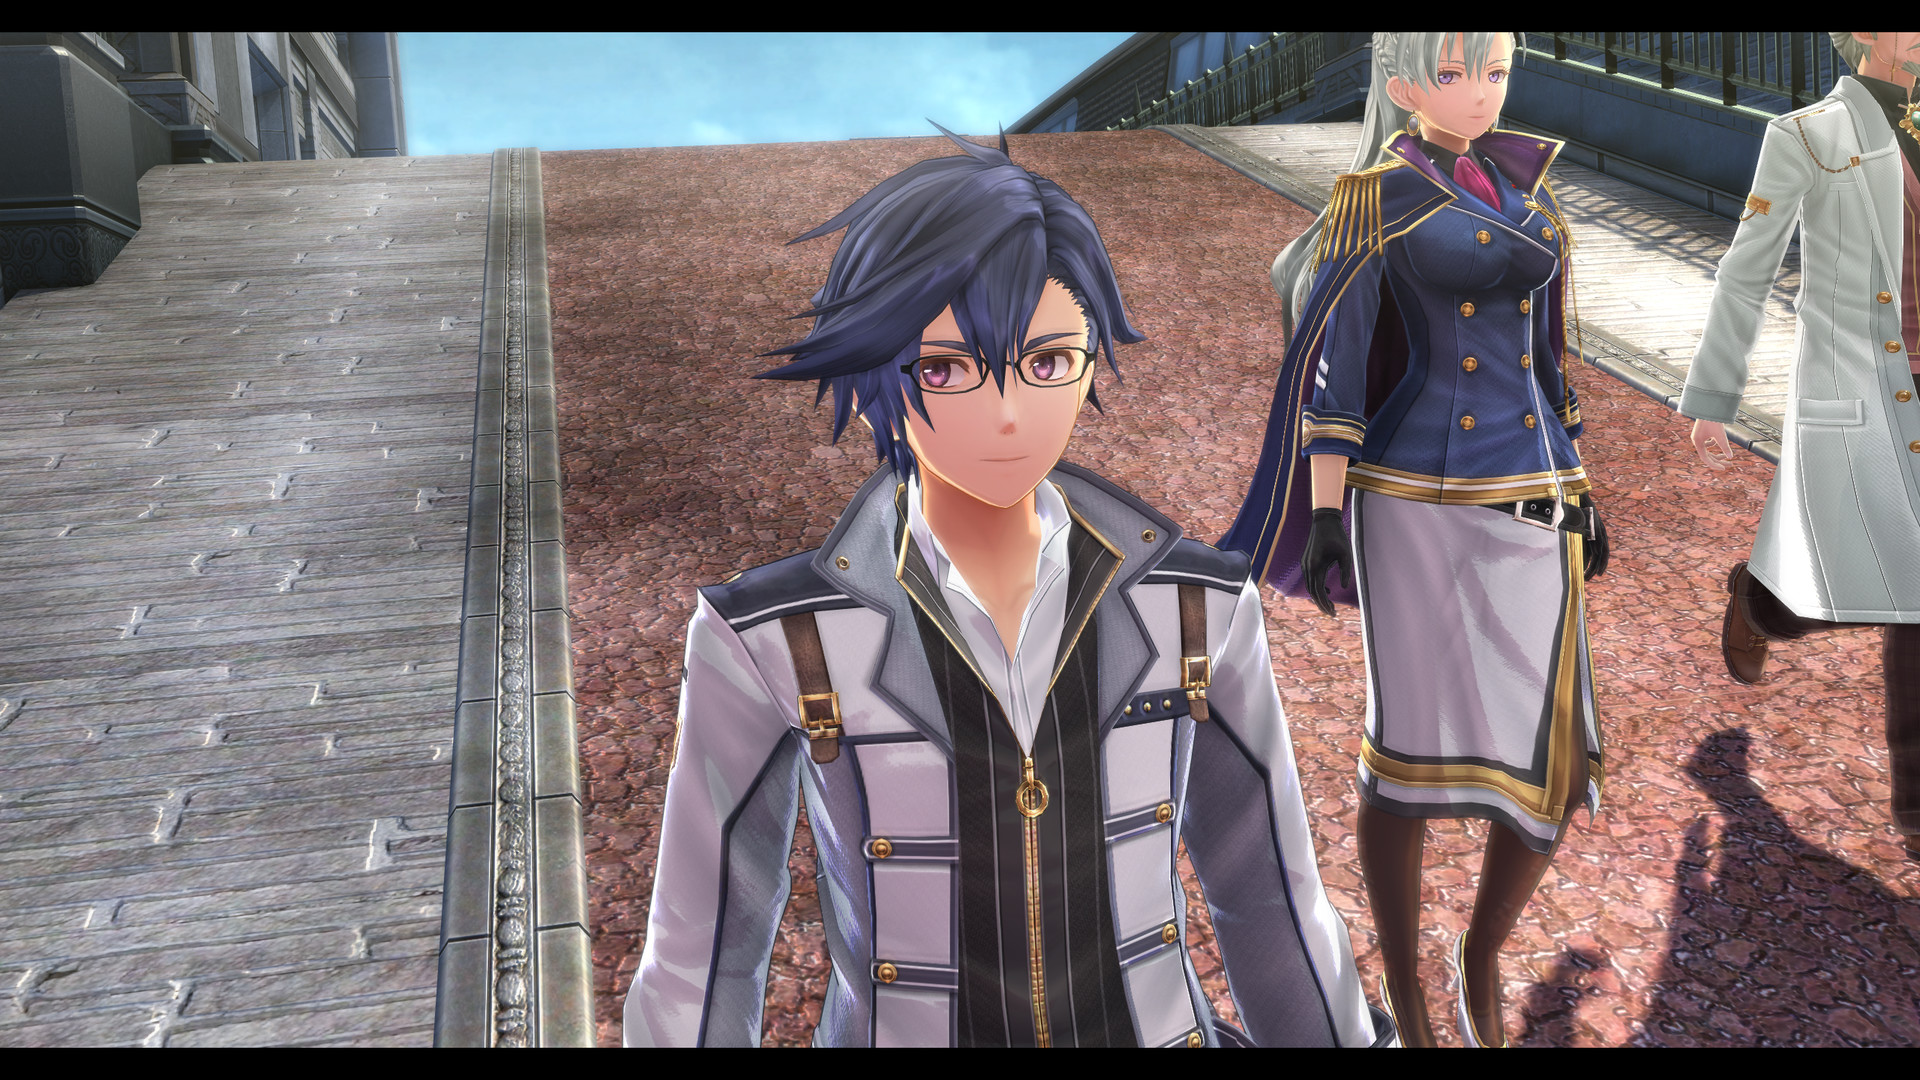 The Legend of Heroes: Trails of Cold Steel III Free Download